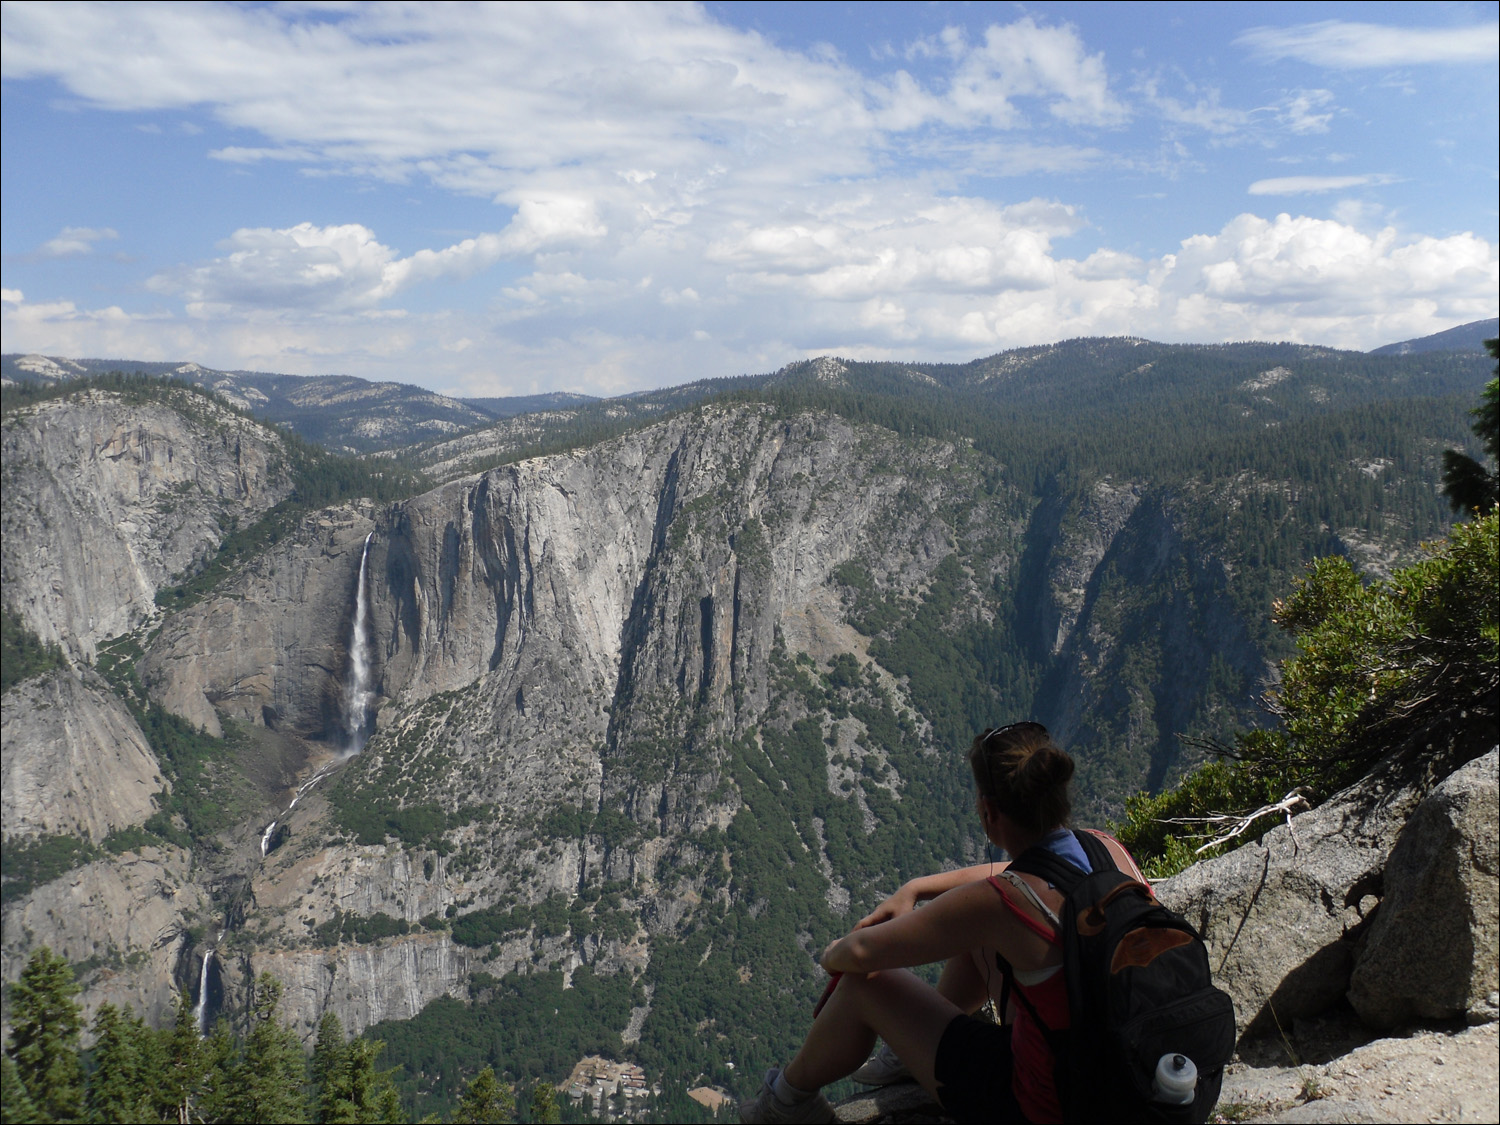 Hike up to Glacier Point- Becky contemplating complete Yosemite Falls view from trail